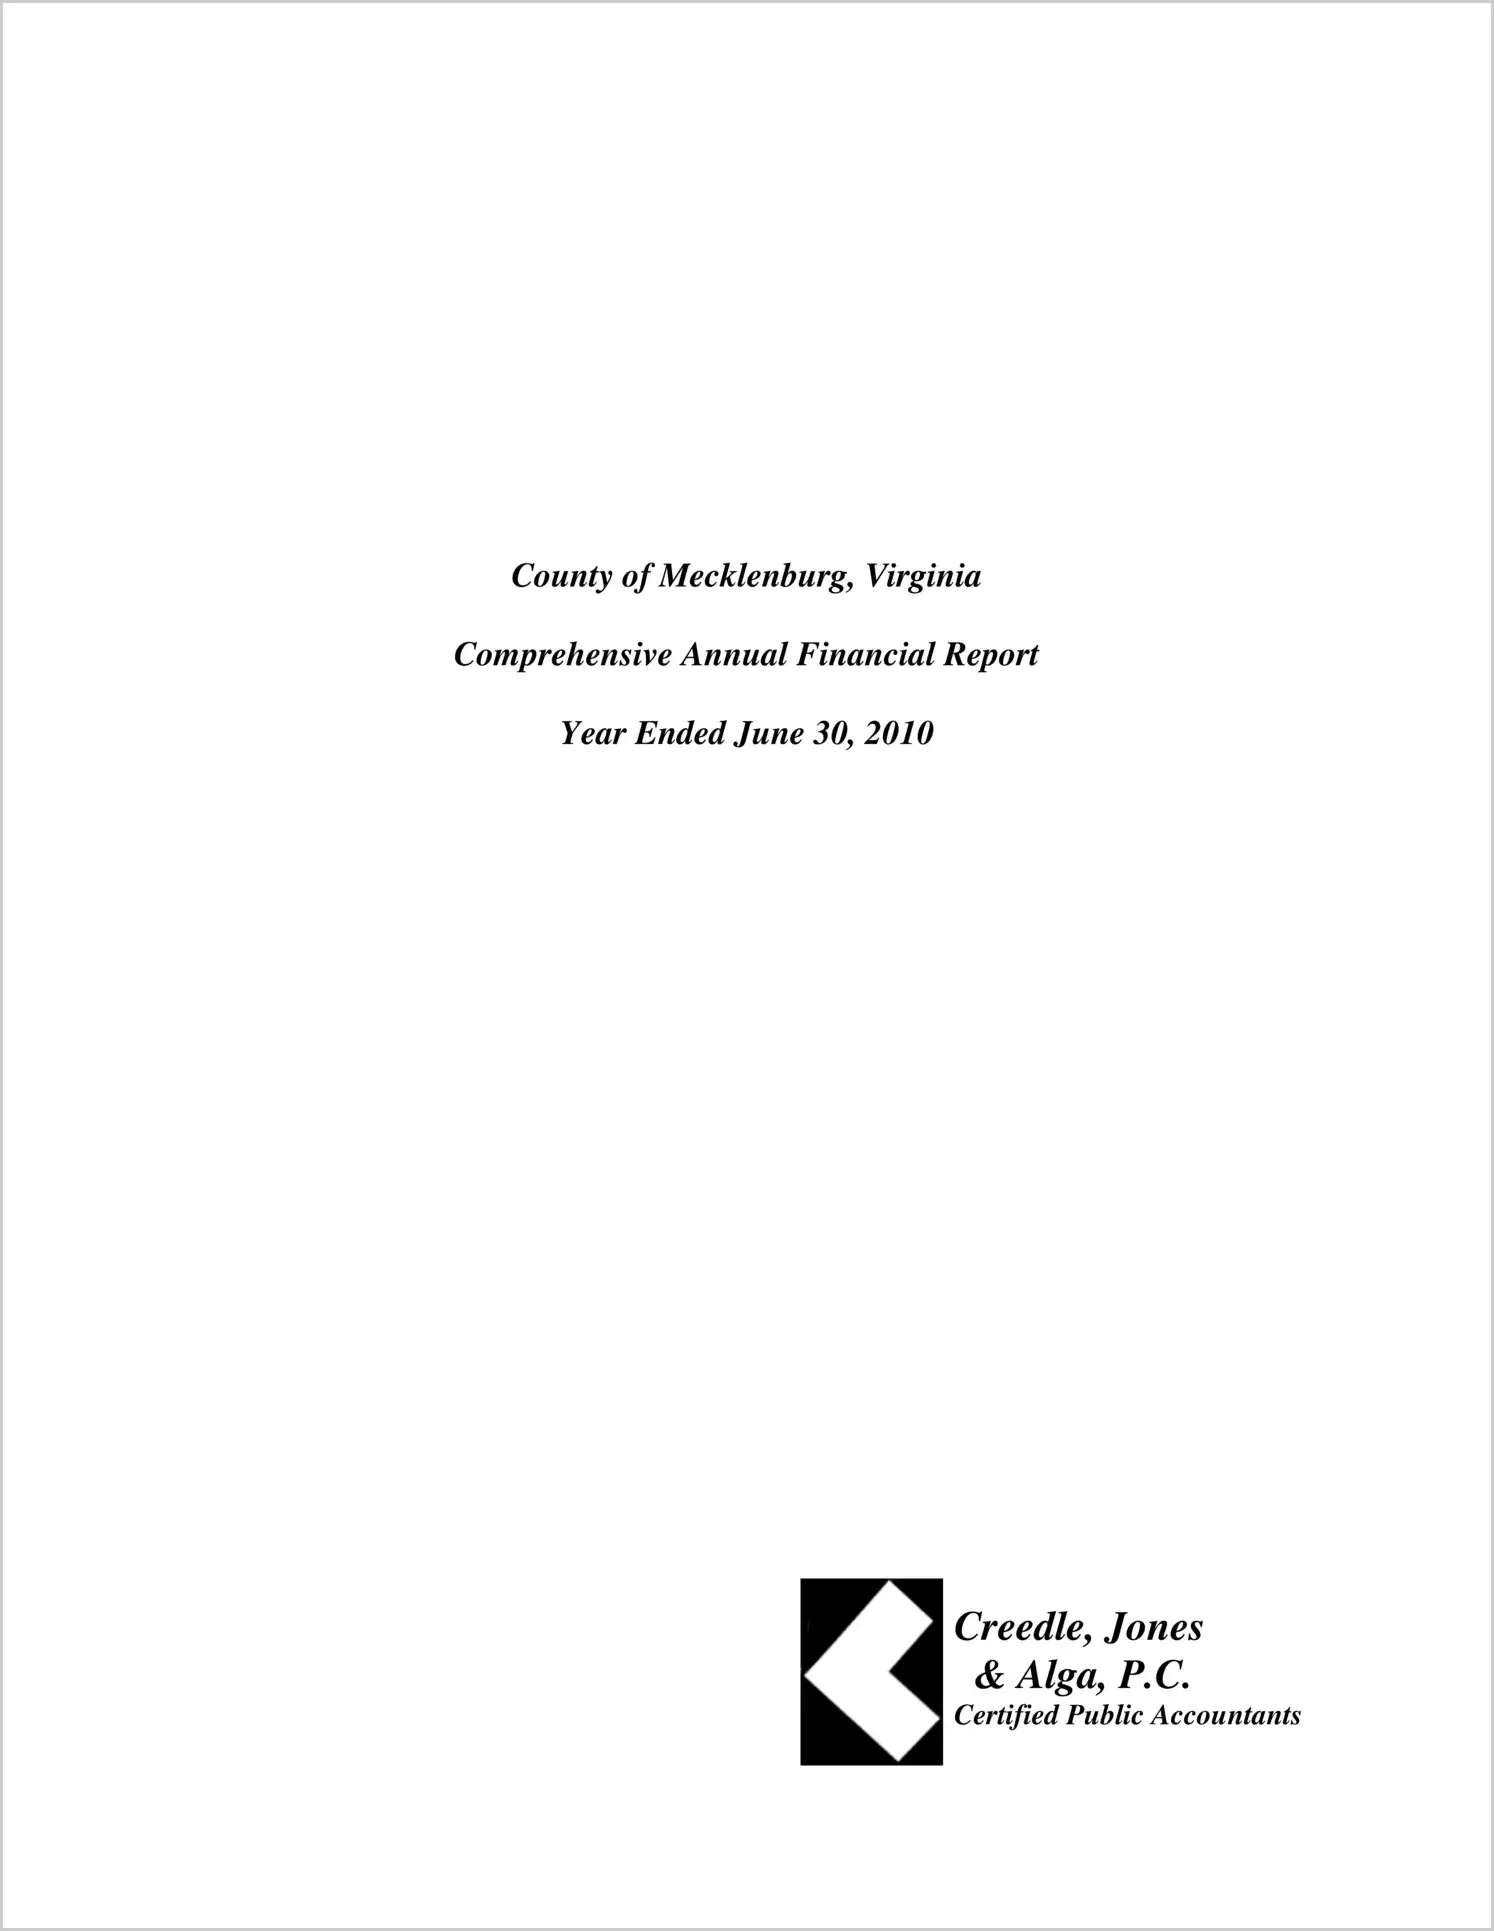 2010 Annual Financial Report for County of Mecklenburg